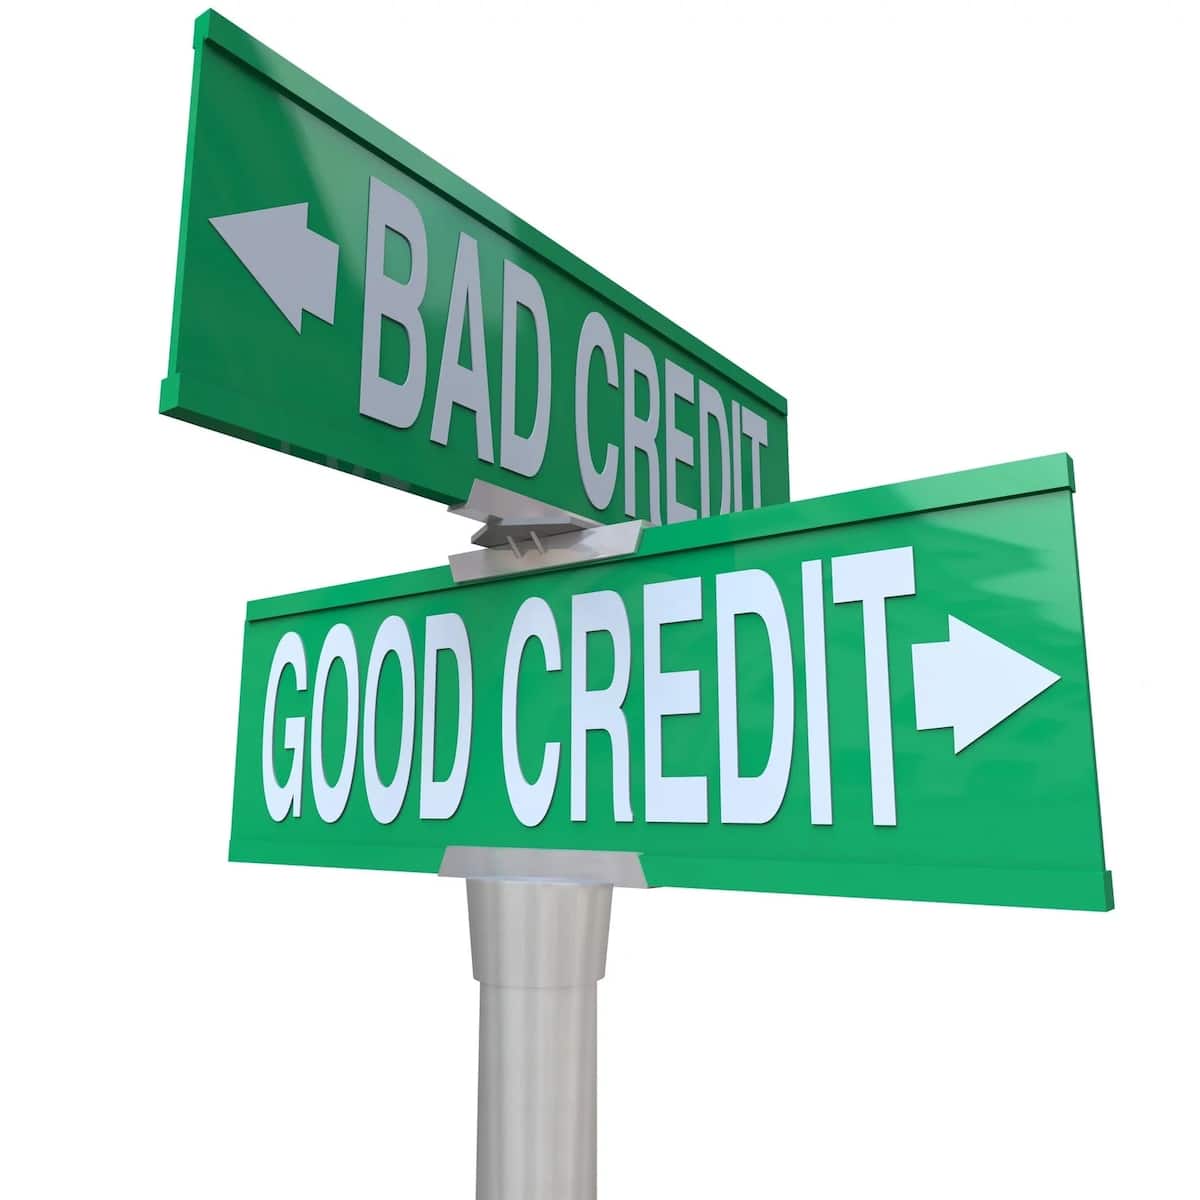 How to check credit score in kenya